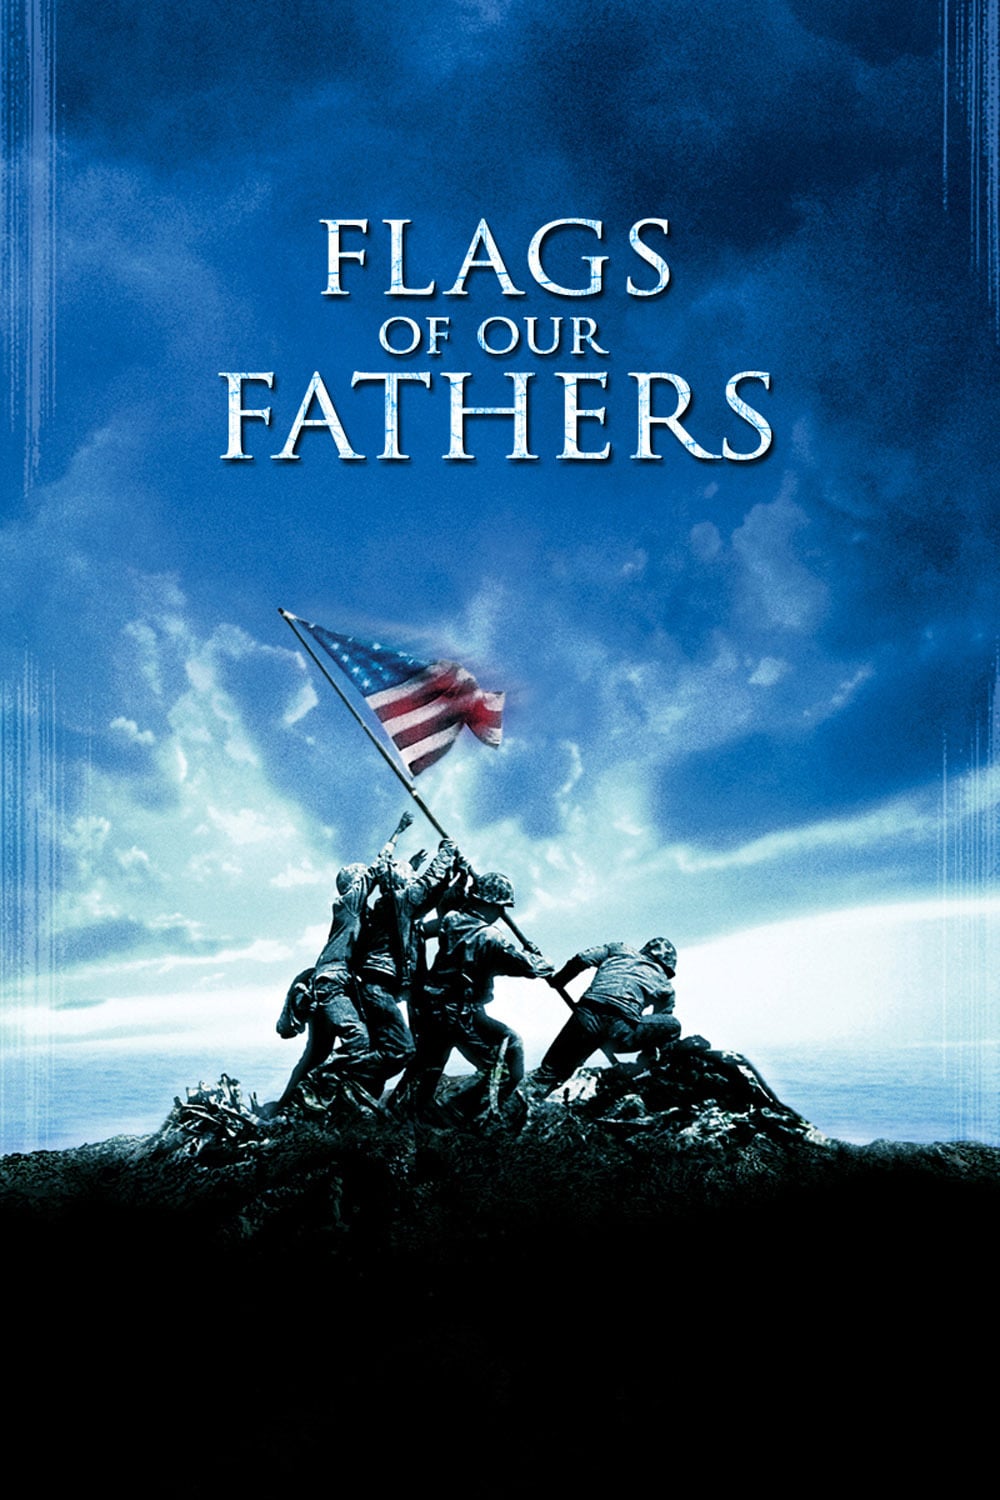 Poster for the movie "Flags of Our Fathers"